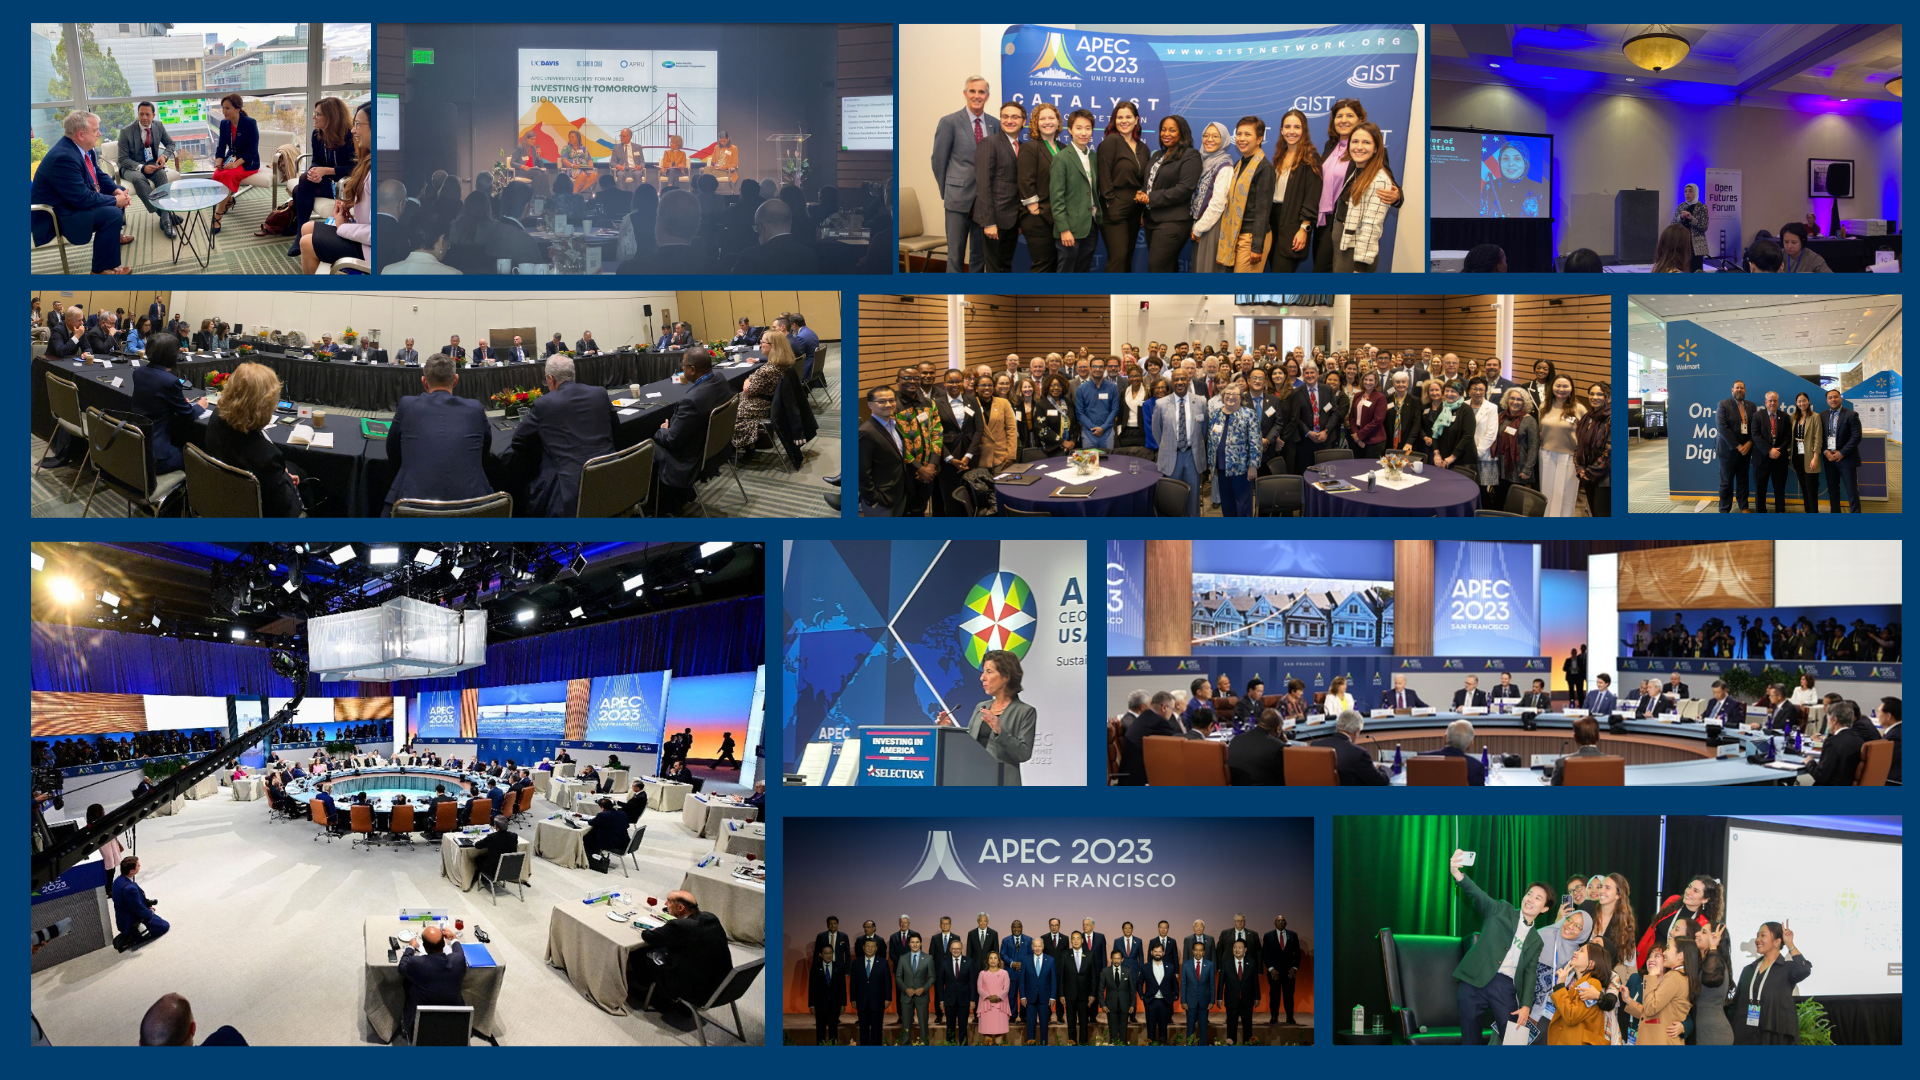 Photo collage of Private Sector and Stakeholder Engagements during the 2023 U.S. APEC Economic Leaders' Week in San Francisco.